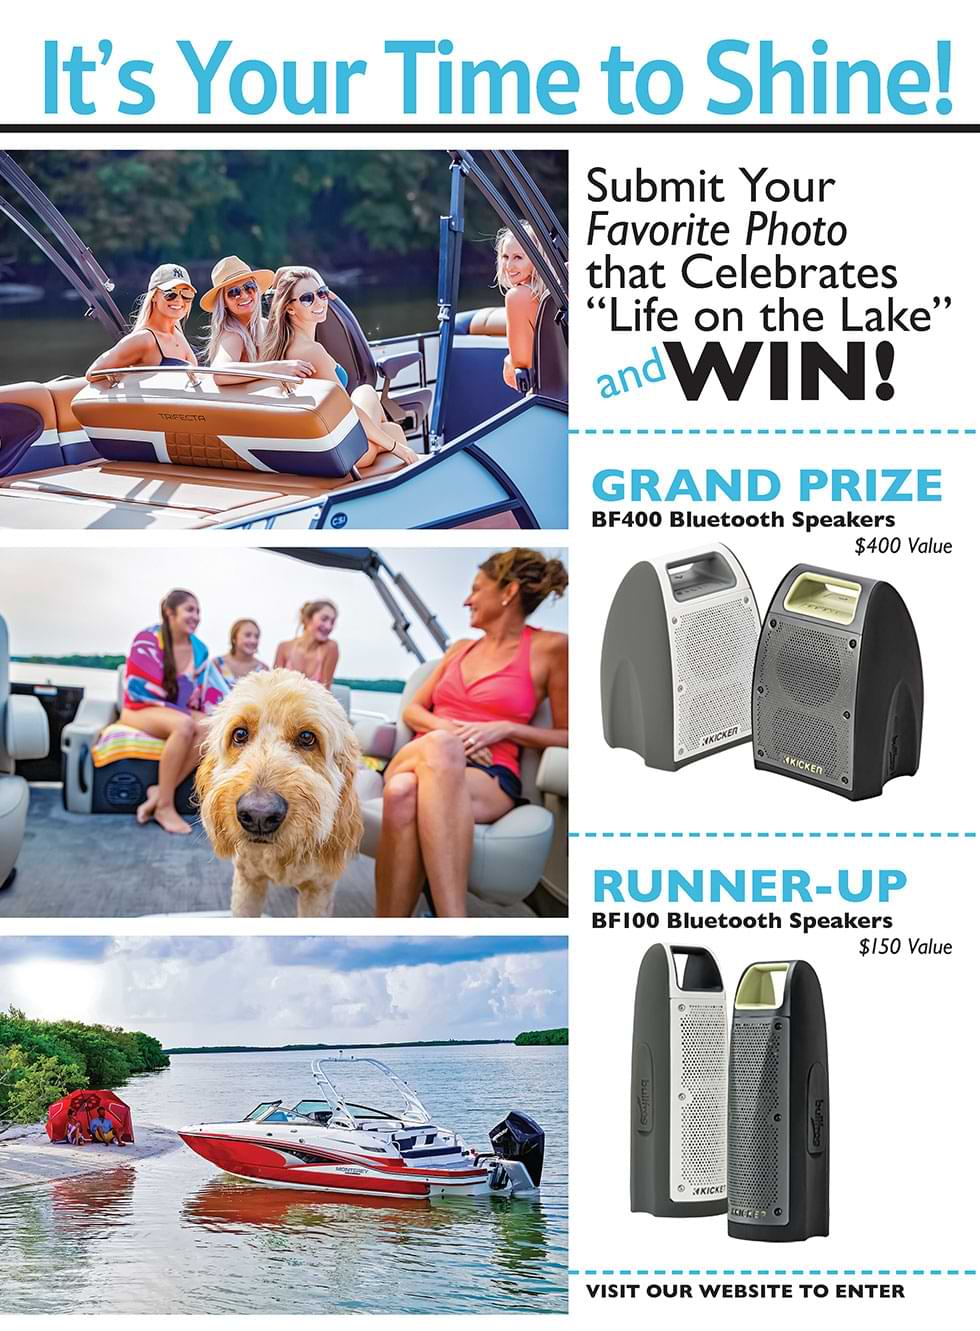 Life on the Lake Photo Contest Advertisement